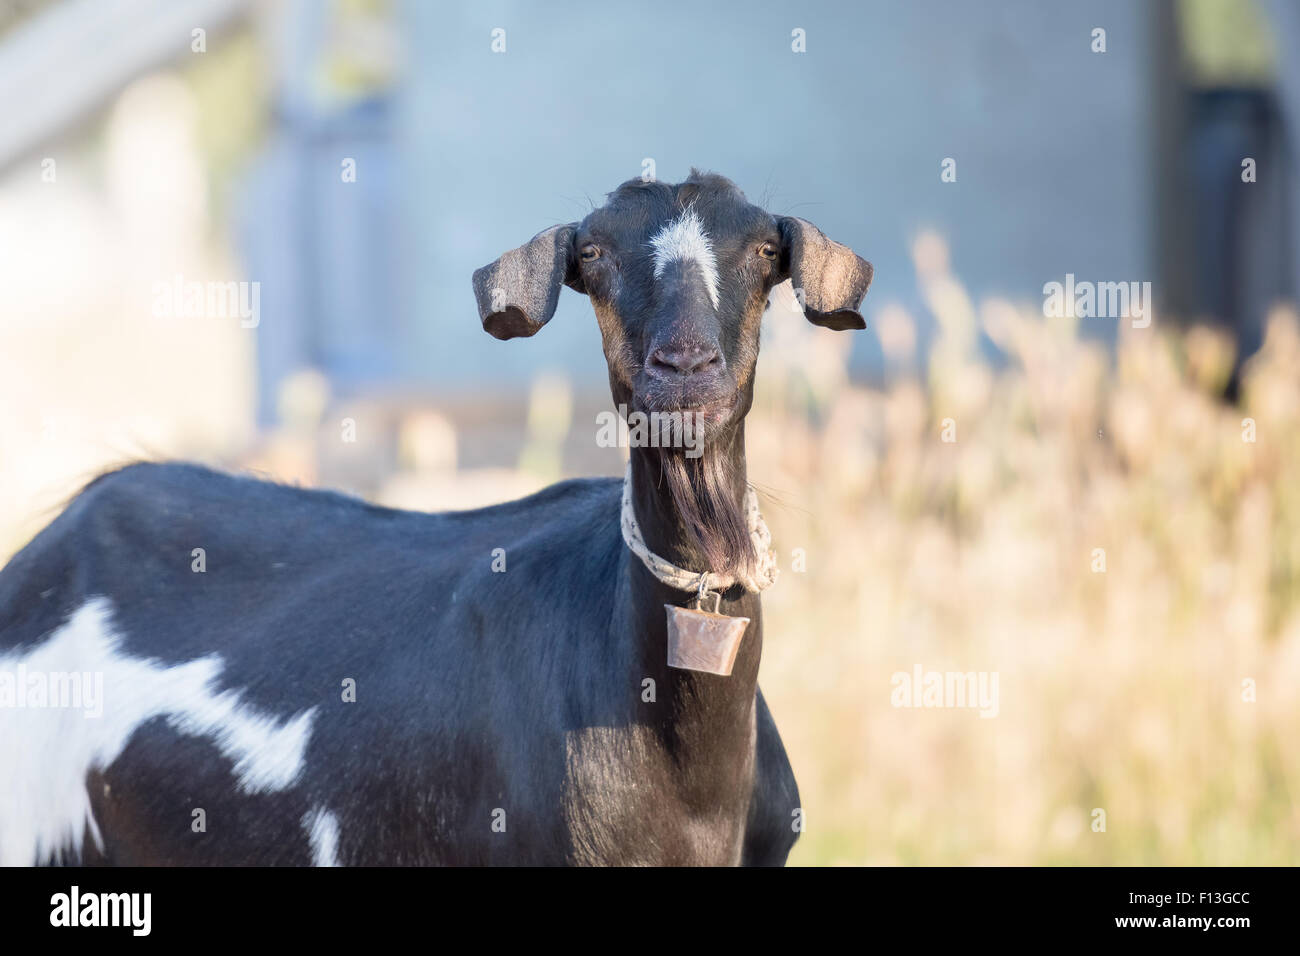 Cute  and funny black goat portrait. Stock Photo